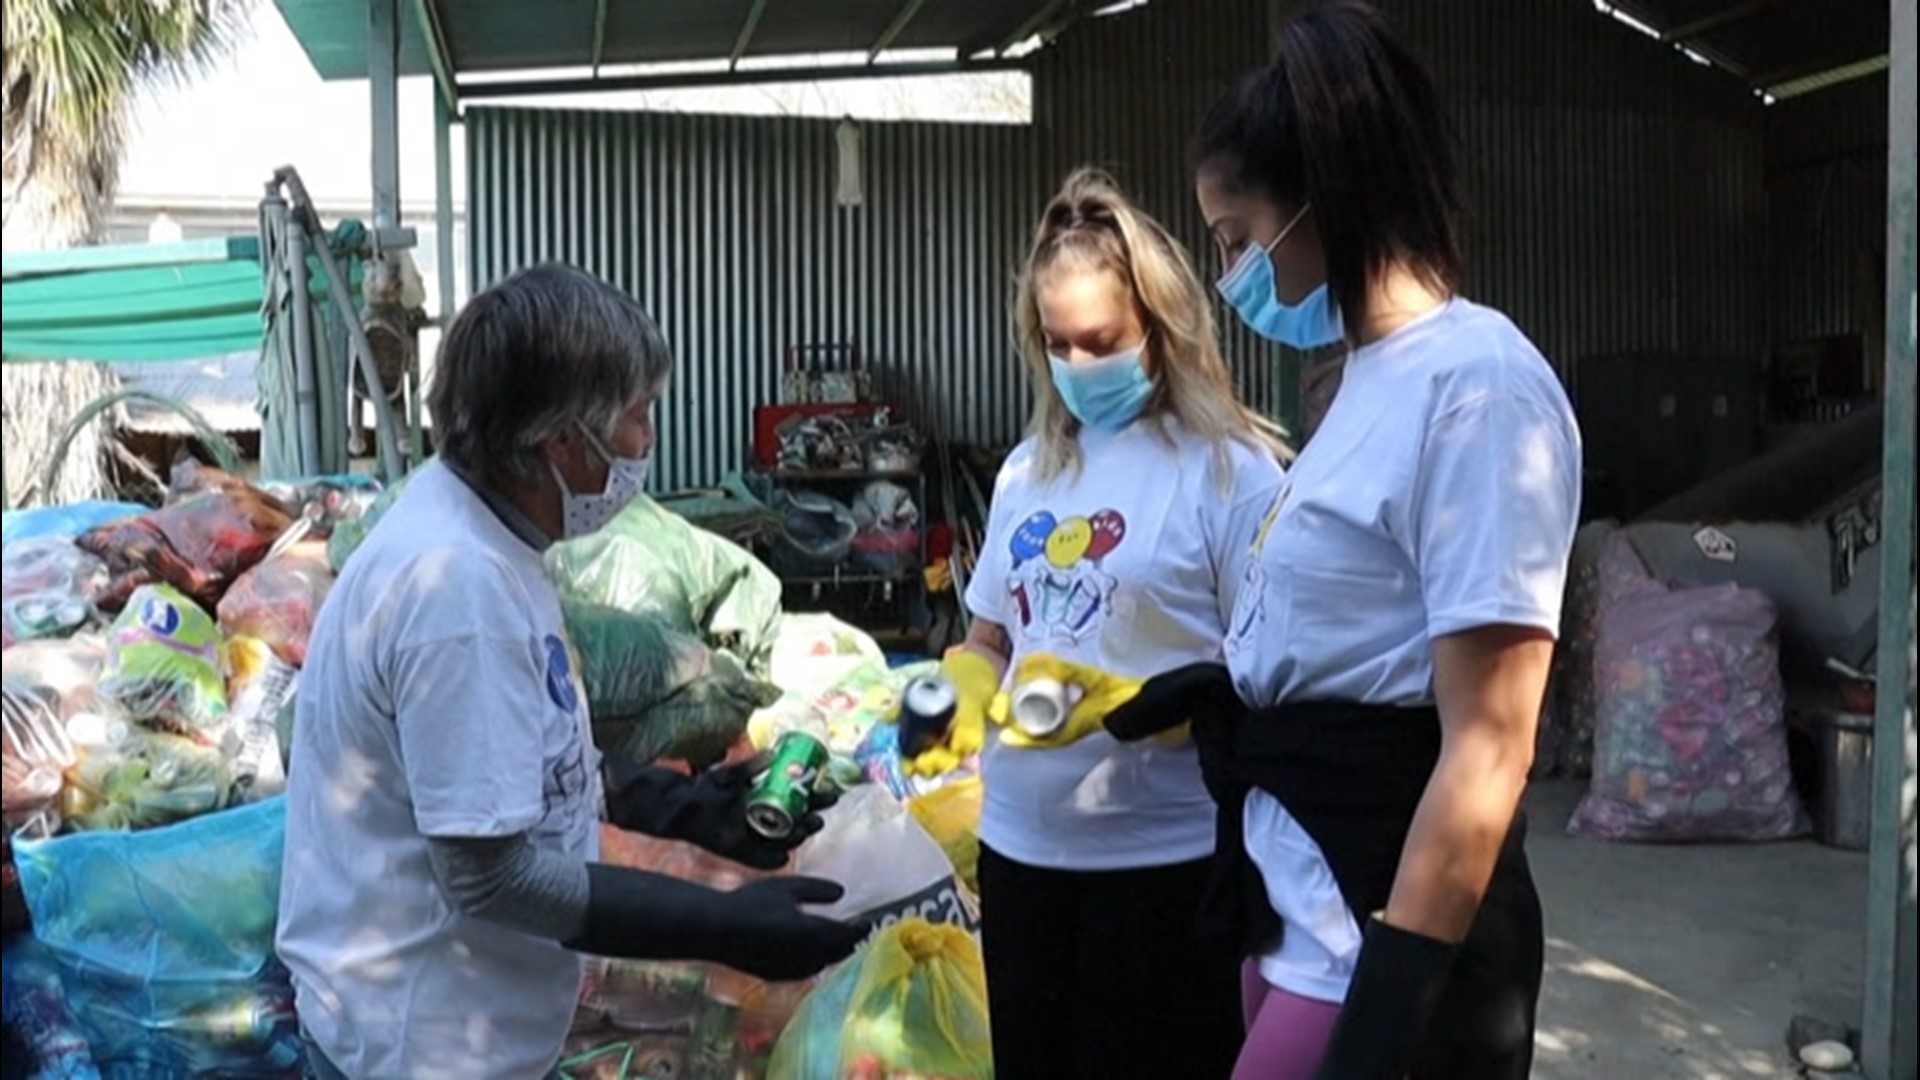 NGOs in Cyprus are utilizing citizen mobilization campaigns in an attempt to get today's youth to volunteer for clean-up efforts and waste-management initiatives.